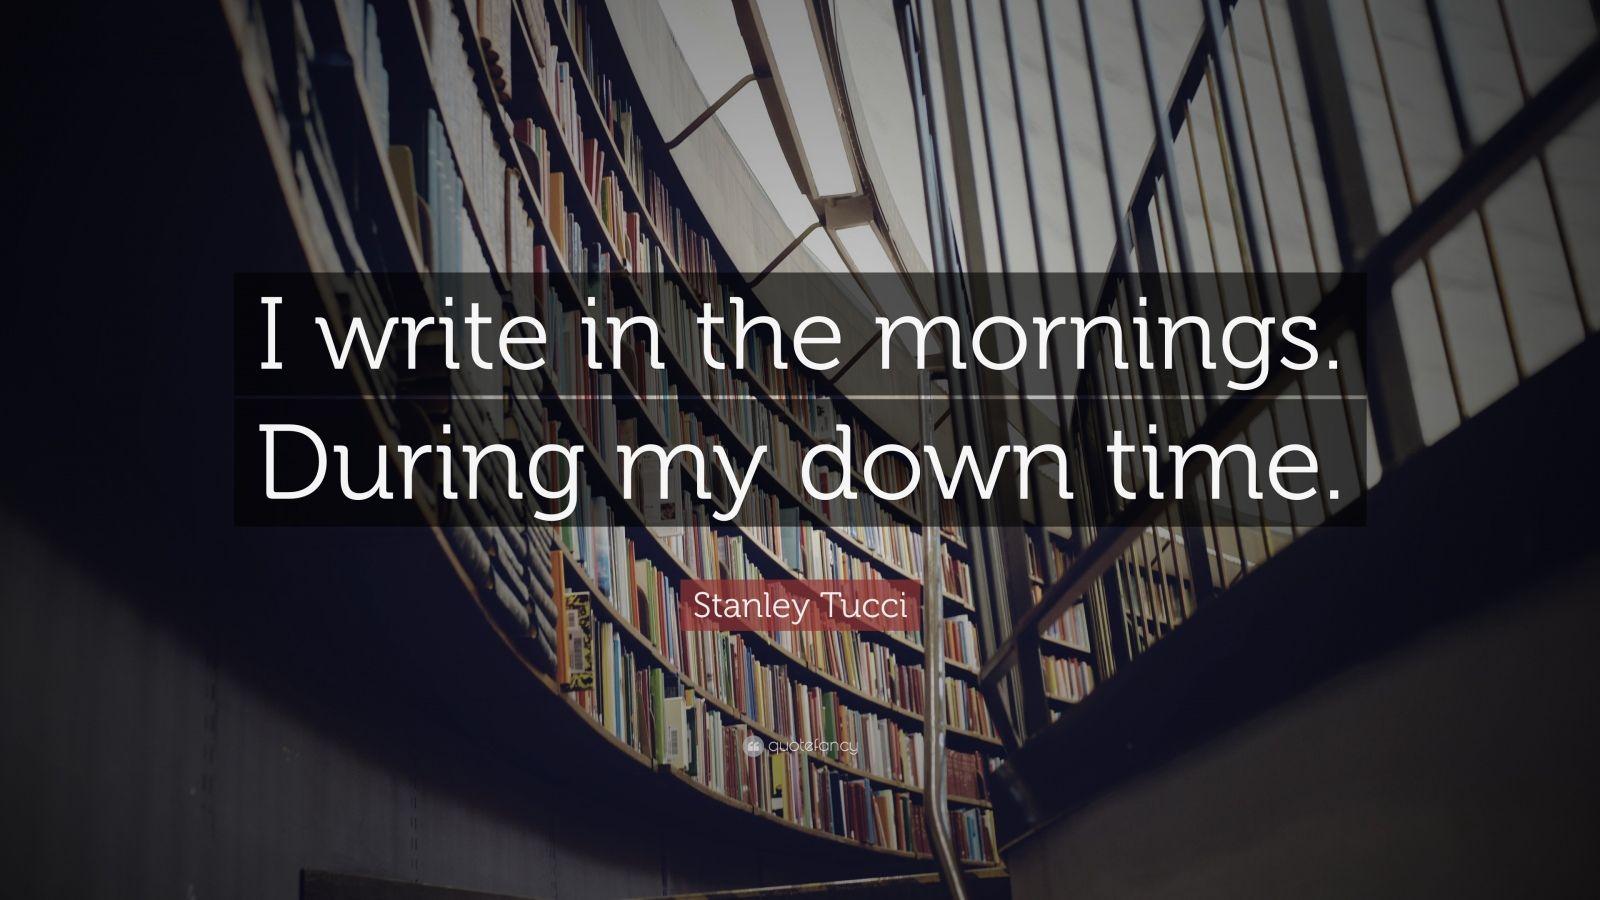 Stanley Tucci Quote: “I write in the mornings. During my down time